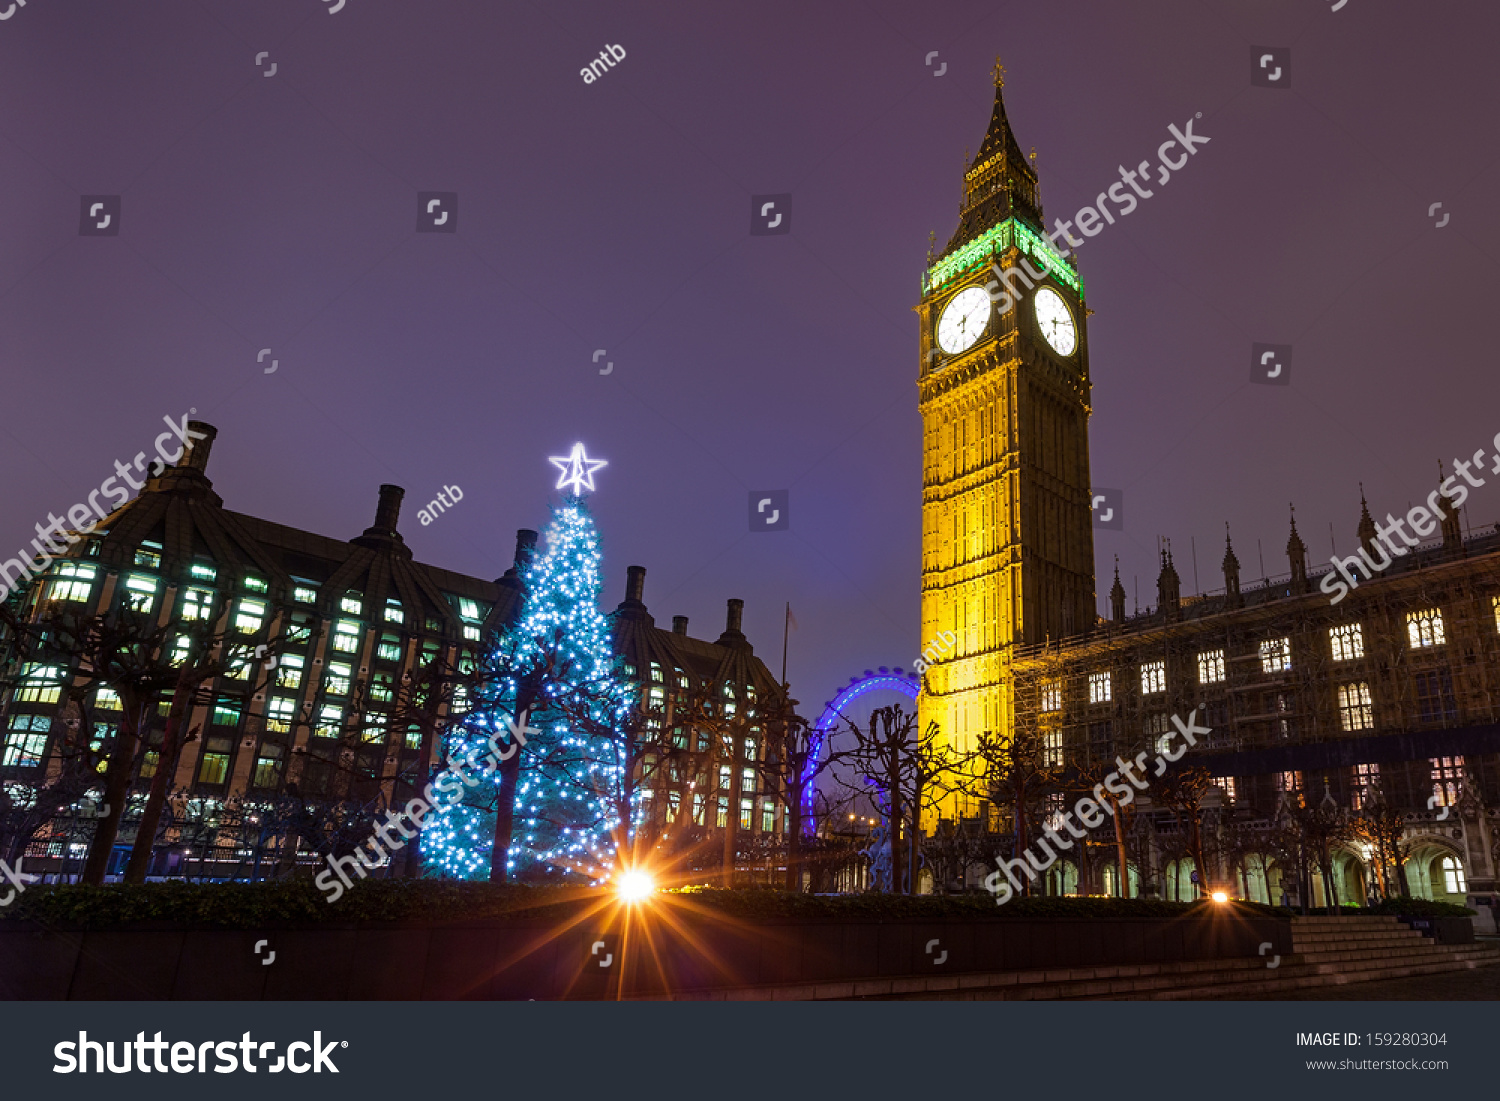 Nighttime View Of The Christmas Tree Outside The Palace Of Westminster